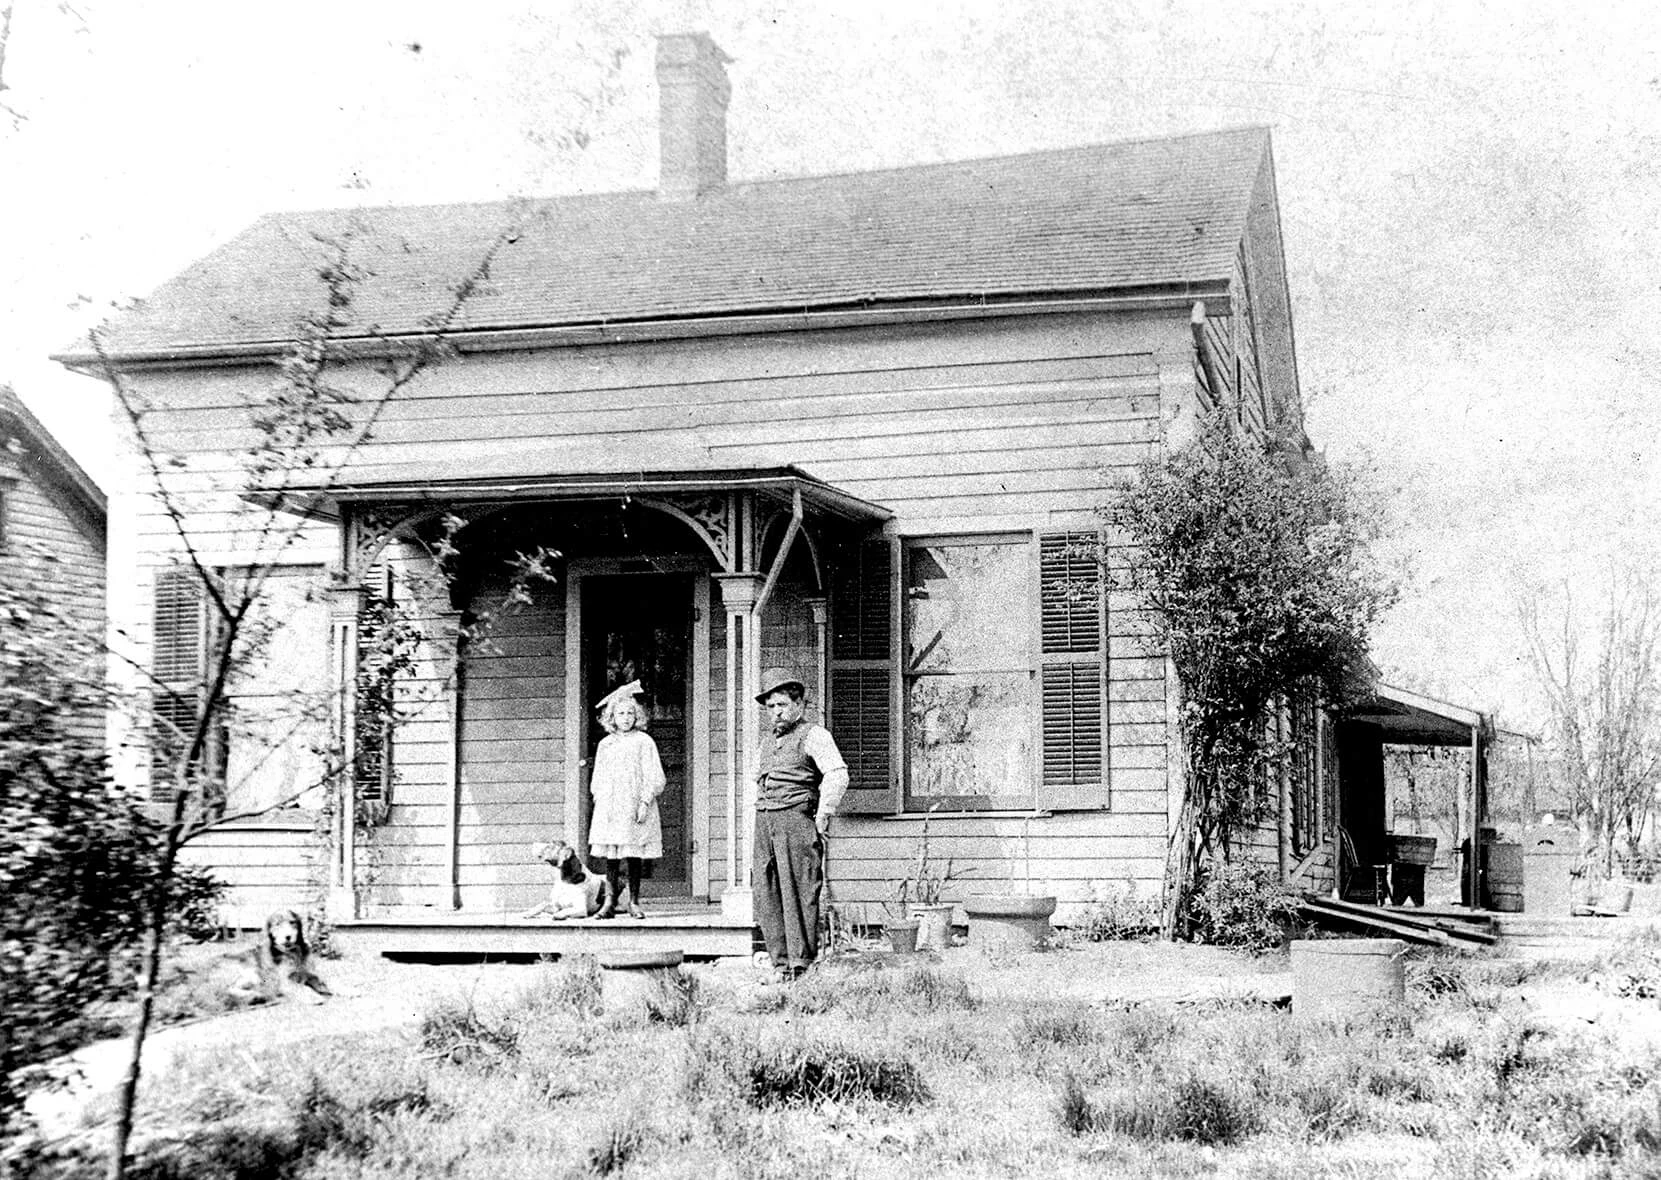 Black and white photo of a small, clapboard home with a front stoop. There is a little girl wearing a white dress standing on the stoop, with her dog at her feet. An older man in a top hat stands on the grass near her. There is a weedy lawn in front of the house.